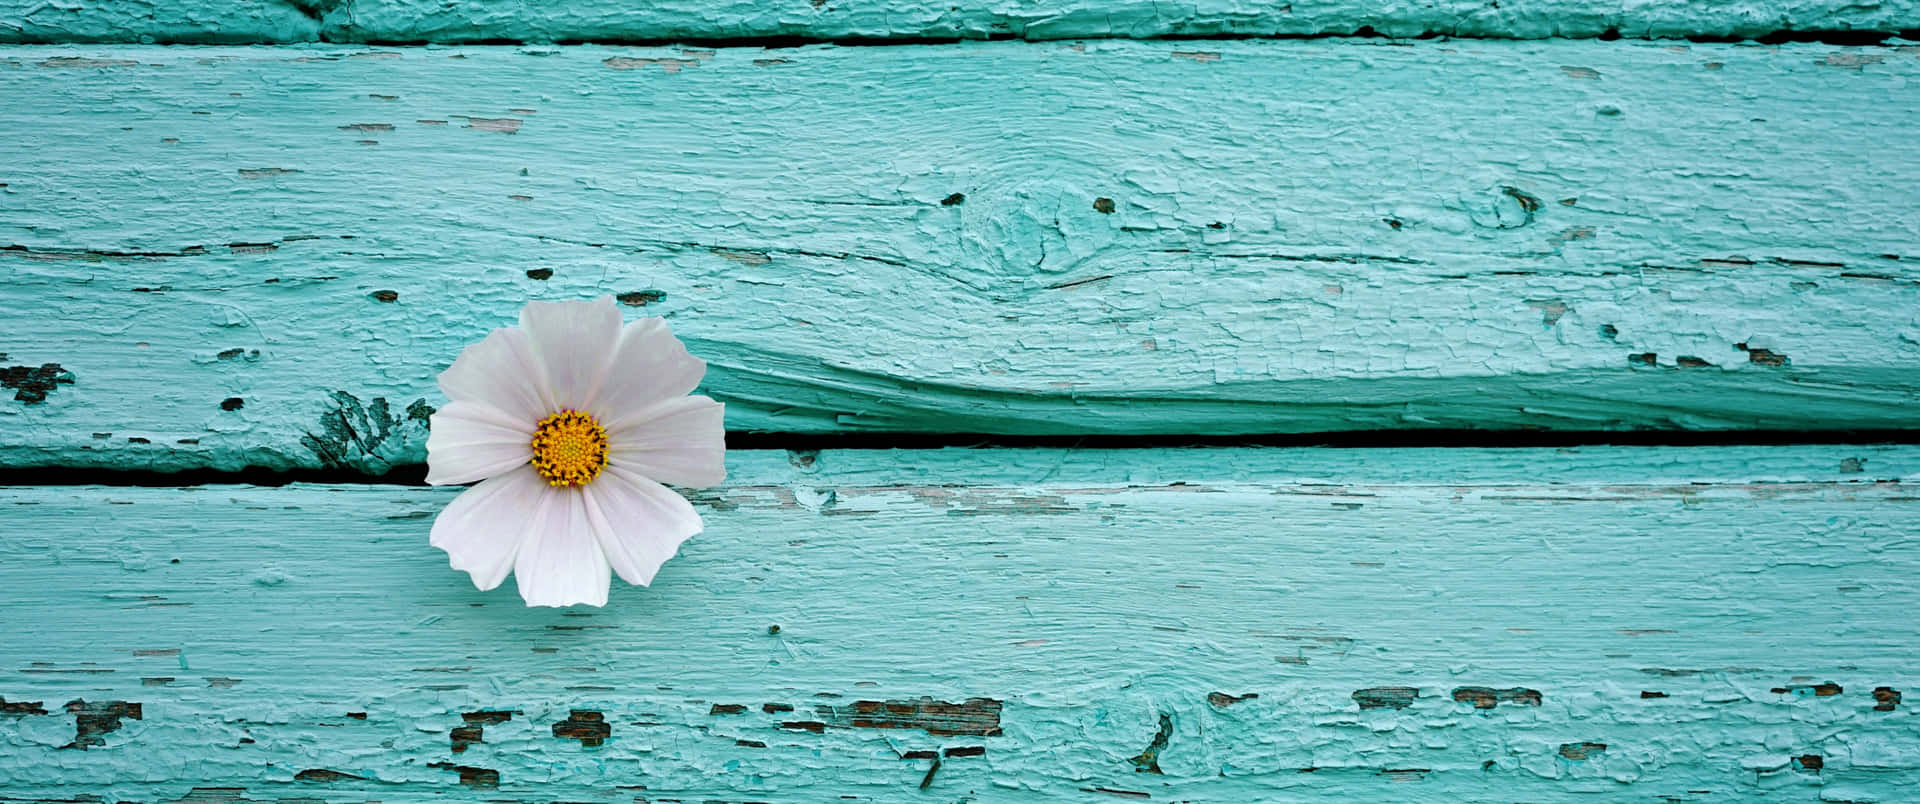 A White Flower On A Turquoise Painted Wall